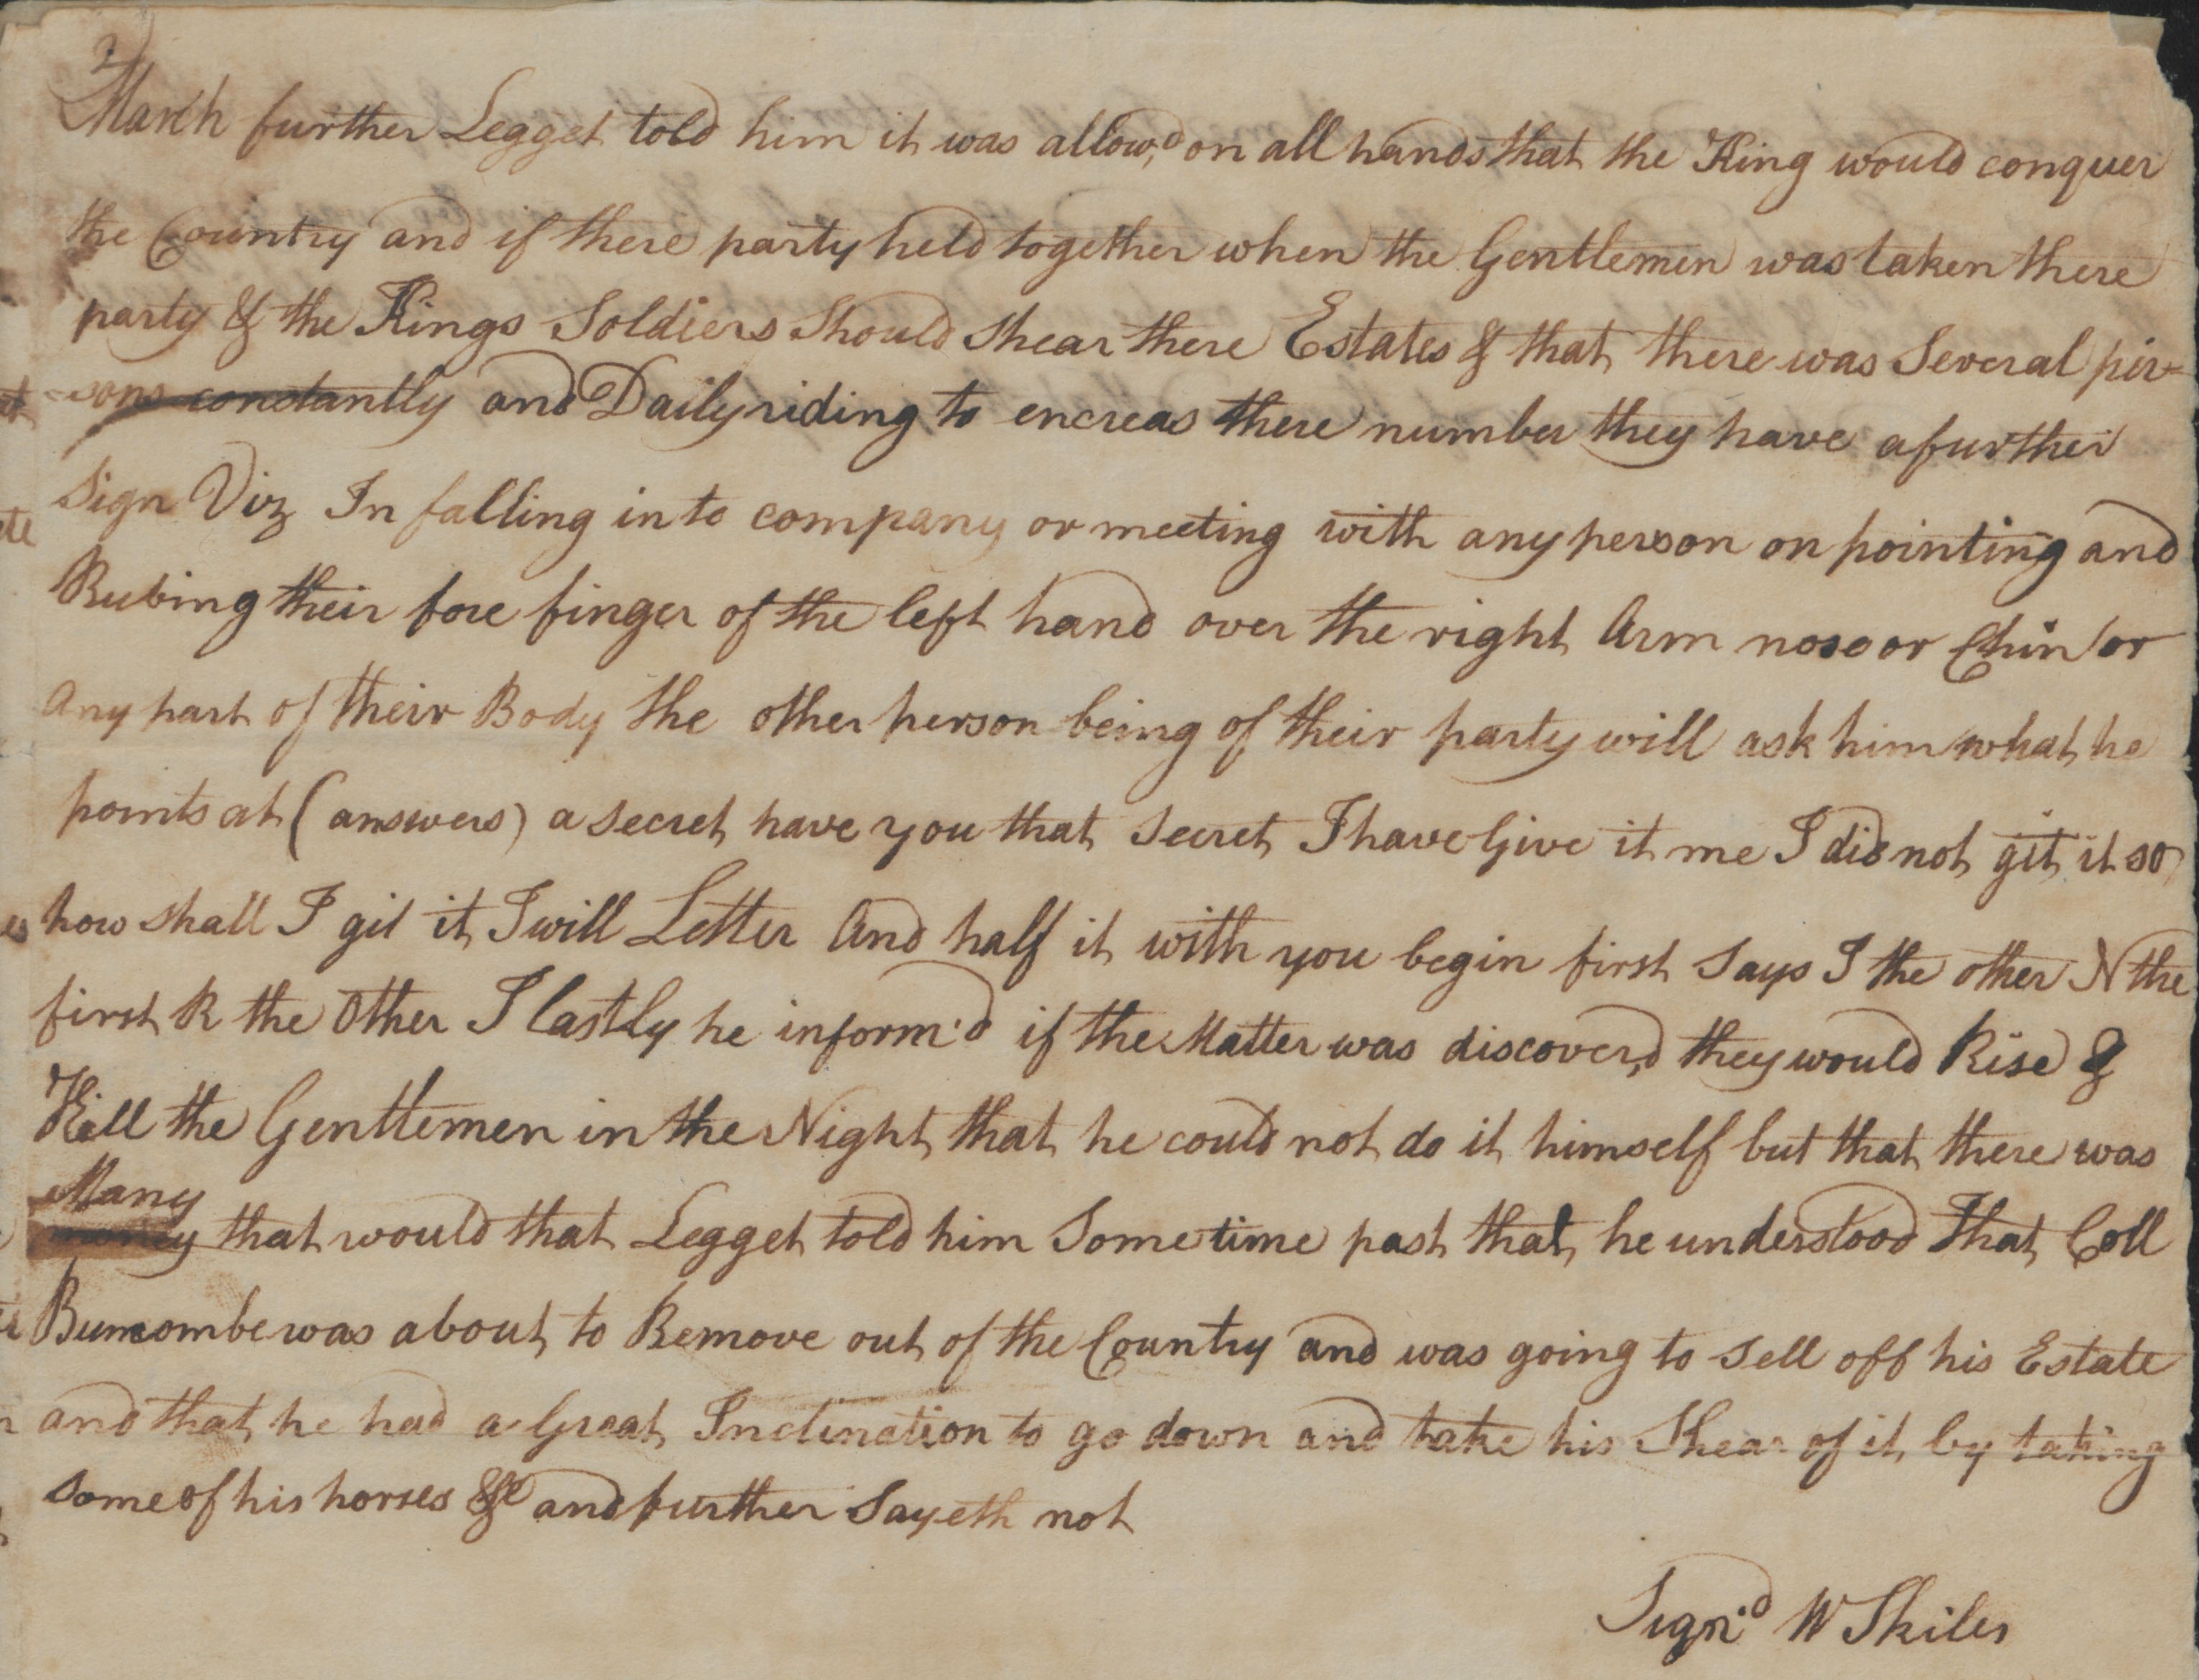 Deposition of William Skyles, circa 1 July 1777, page 2